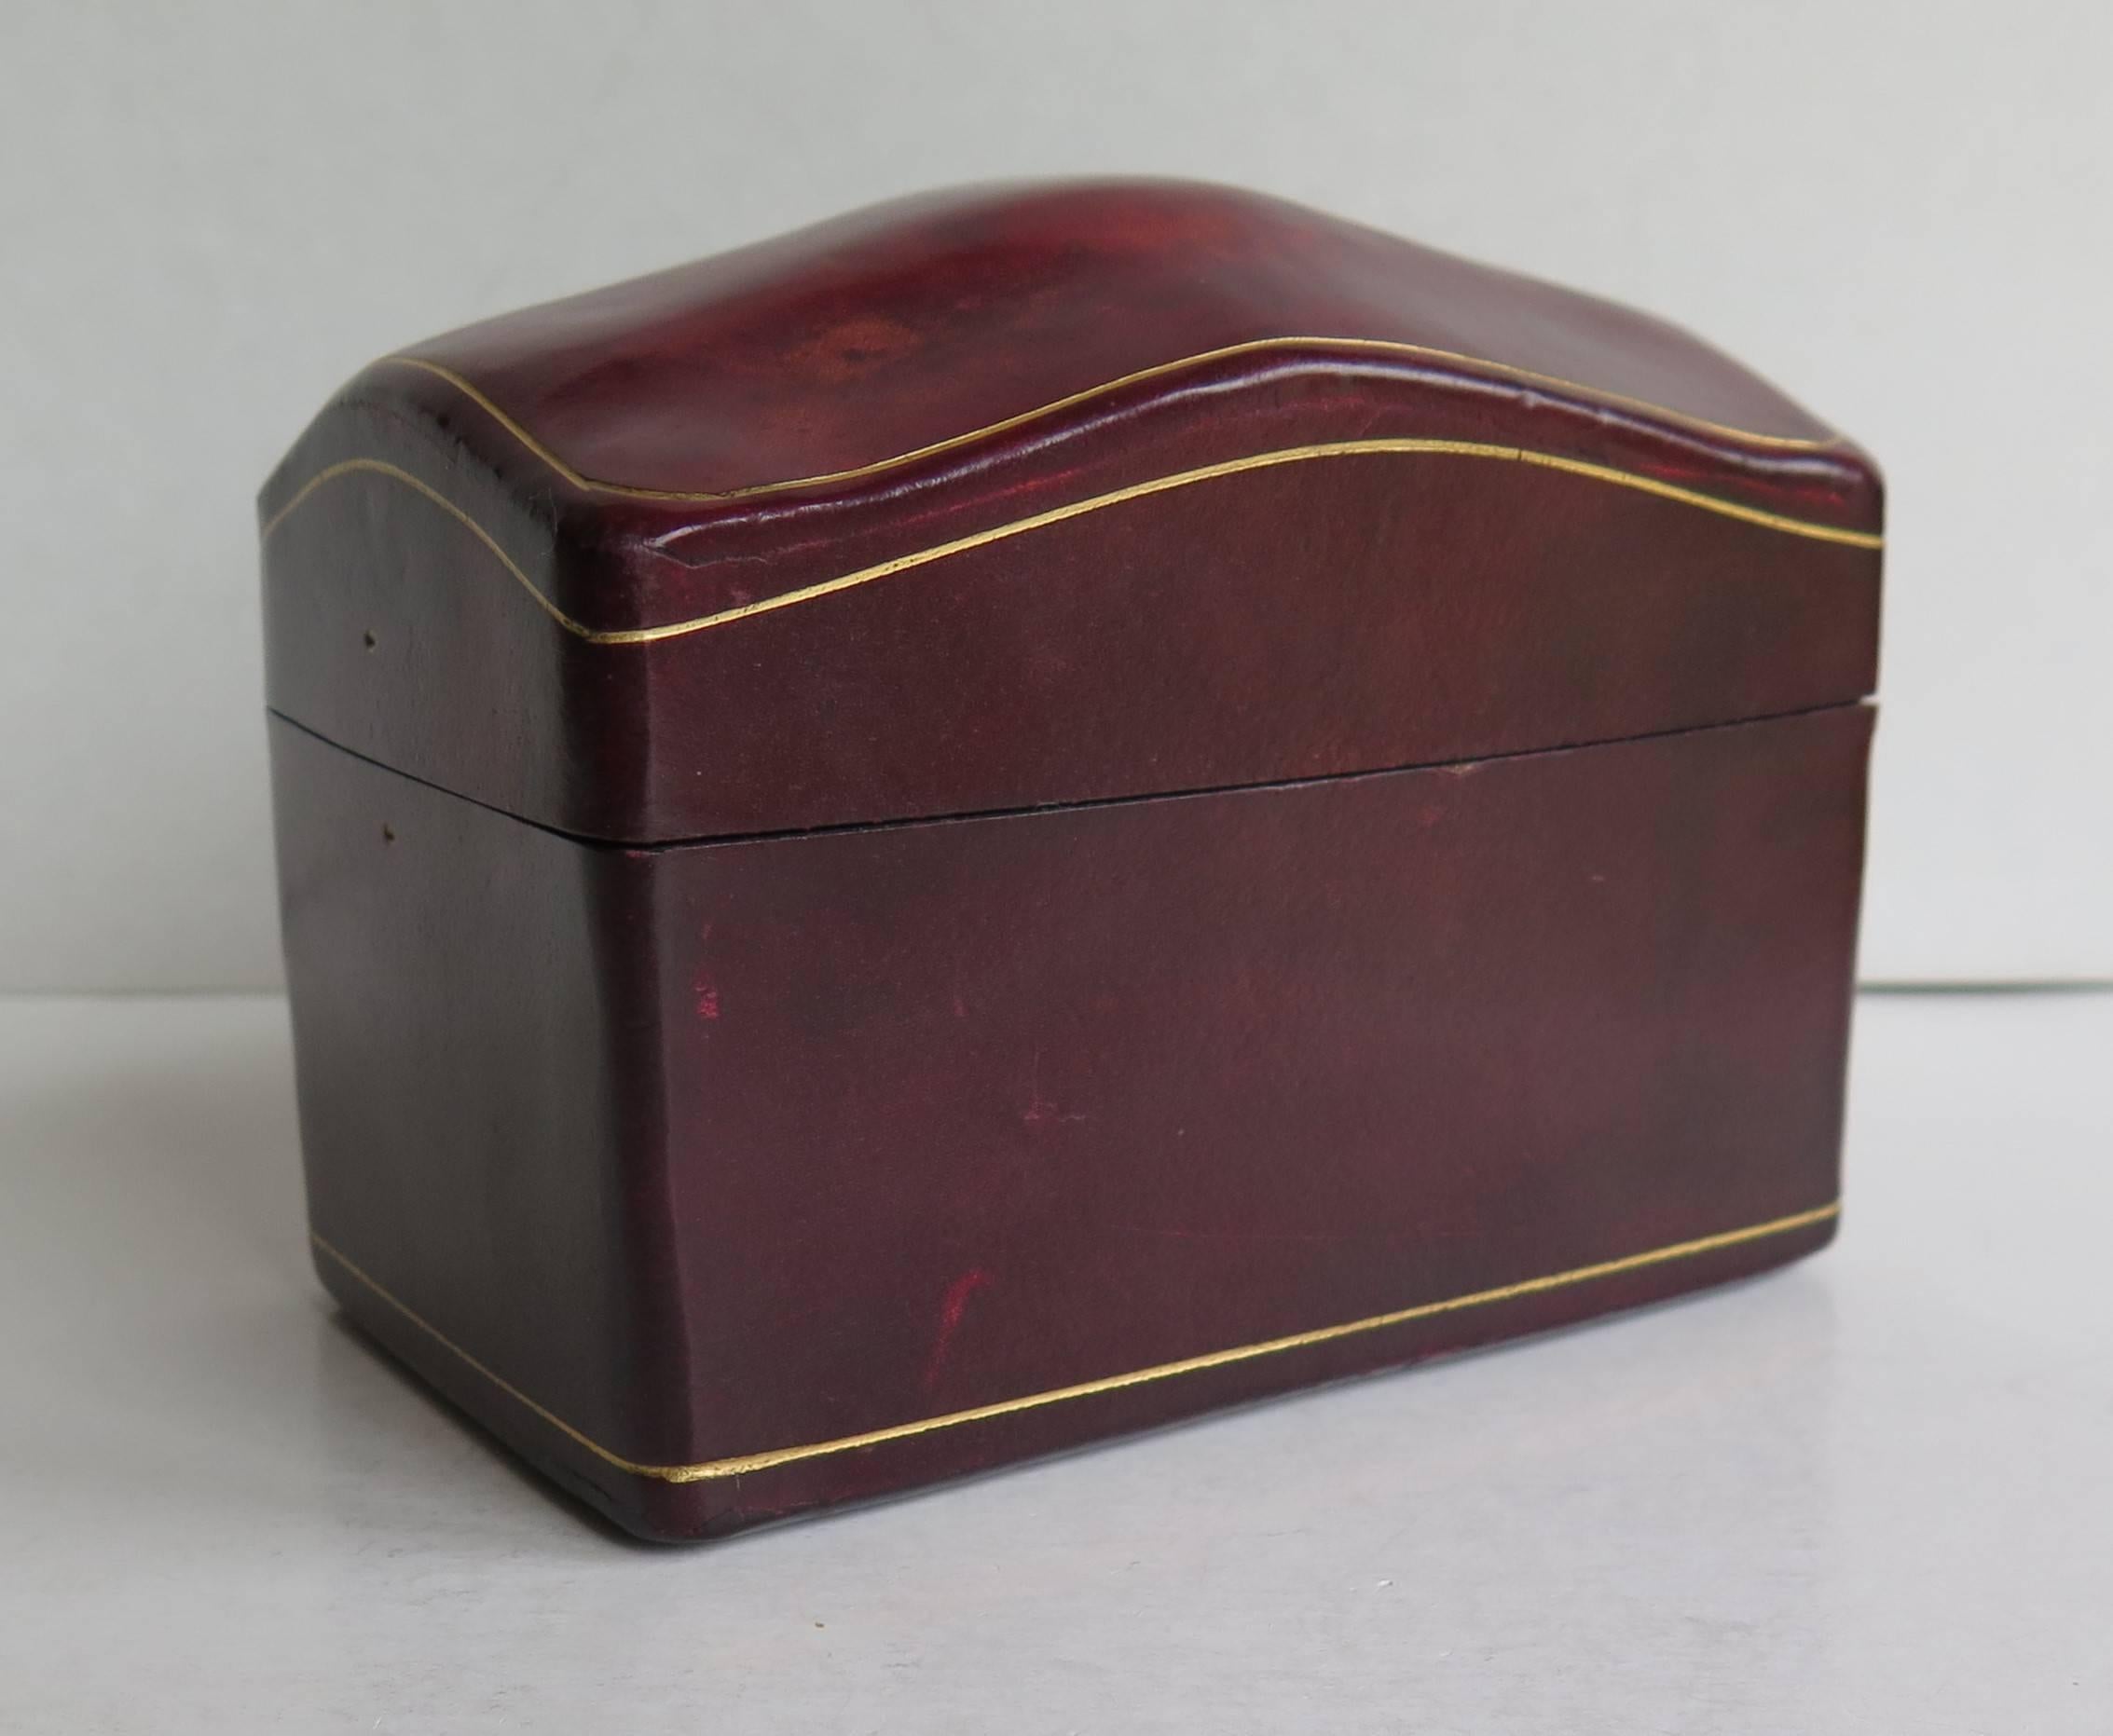 This is a high quality, hand made, Calf Leather Lidded Box to hold two sets of playing cards, made in Italy in the mid 20th Century.

The hand tooled box is rectangular in shape with a domed lid. Internally the box has two compartments to house two